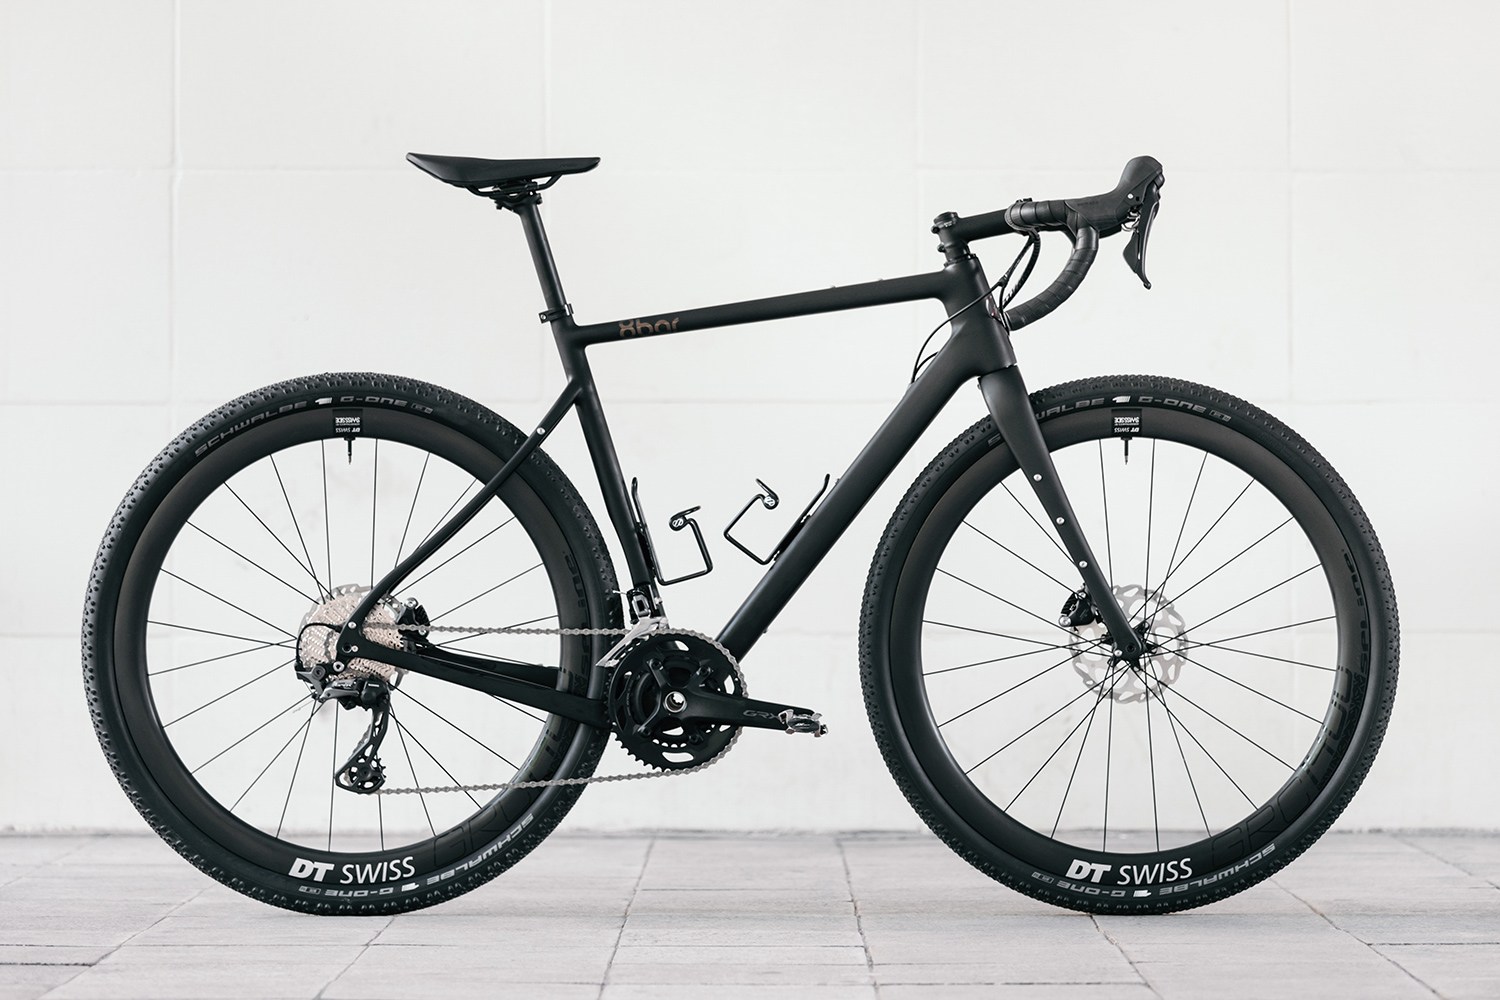 1. The key features that make the most expensive bicycle worth the investment